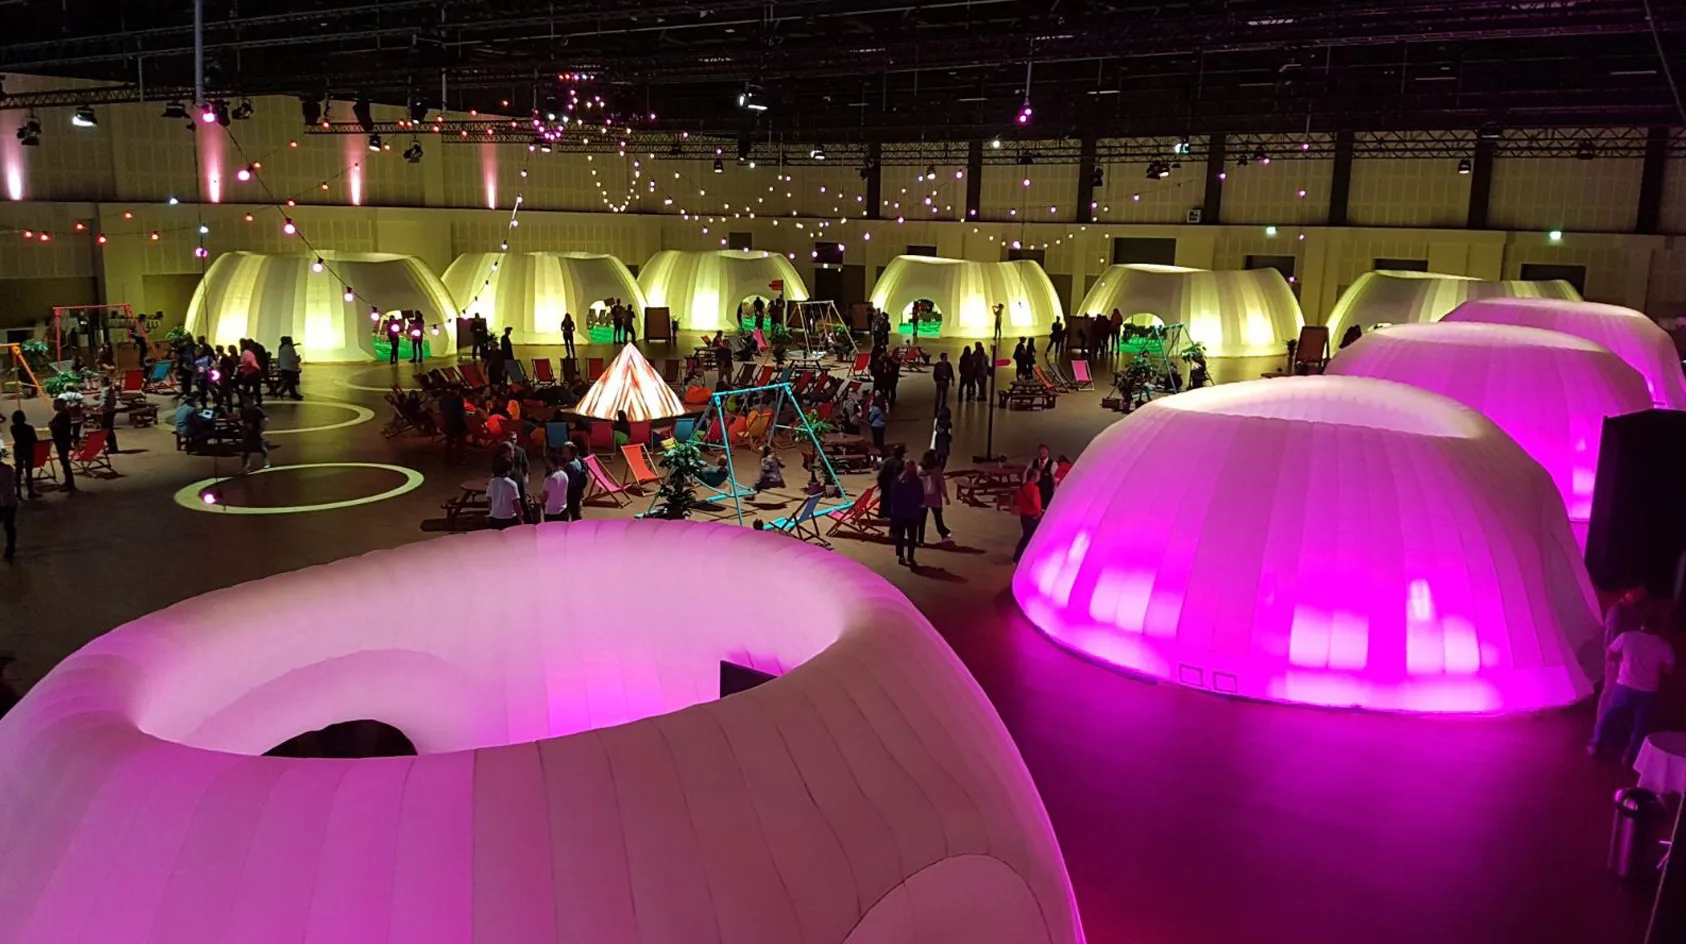 Pic showing the Created By Air Panoramic inflatable structures lit using both yellow and pink LED lighting